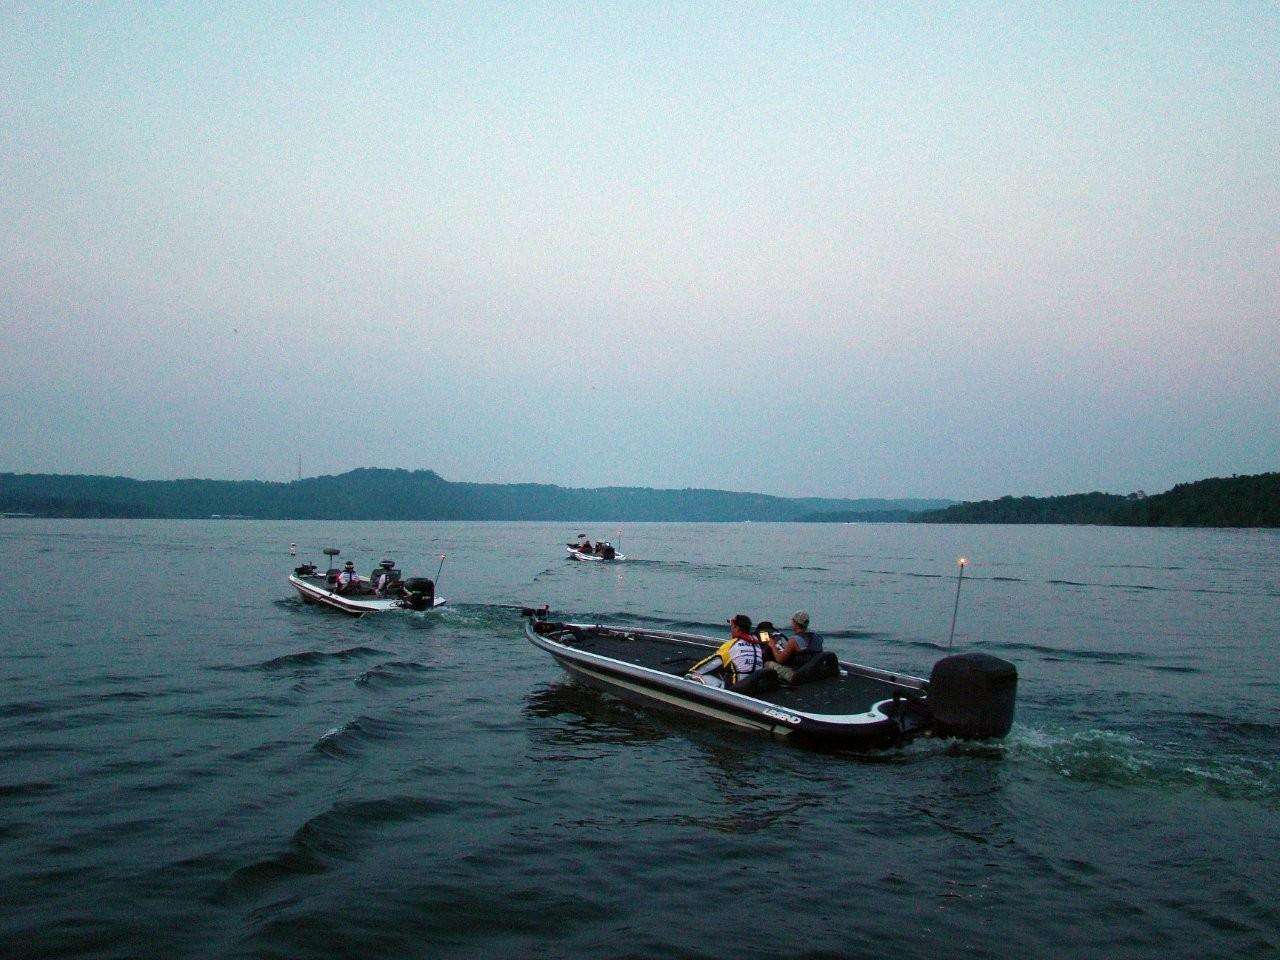 <p>
	Central Divisional competitors set out on what promises to be a second hot day on Table Rock Lake.</p>
